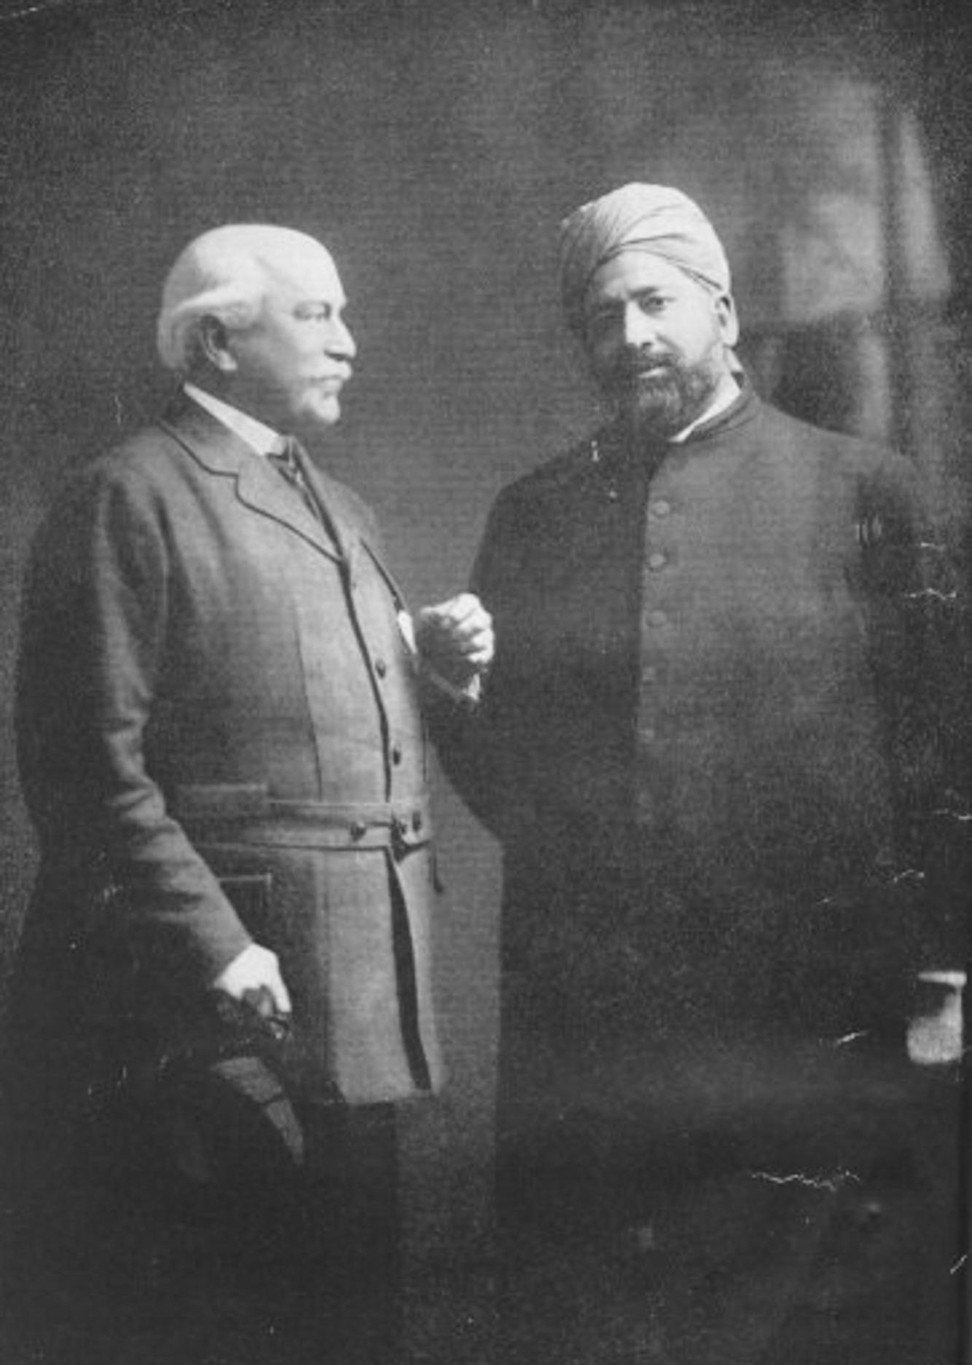 Lord Headley (left), who became known as âThe Moslem Peerâ, with the first Muslim missionary to Britain, Khwaja Kamal-ud-Din.